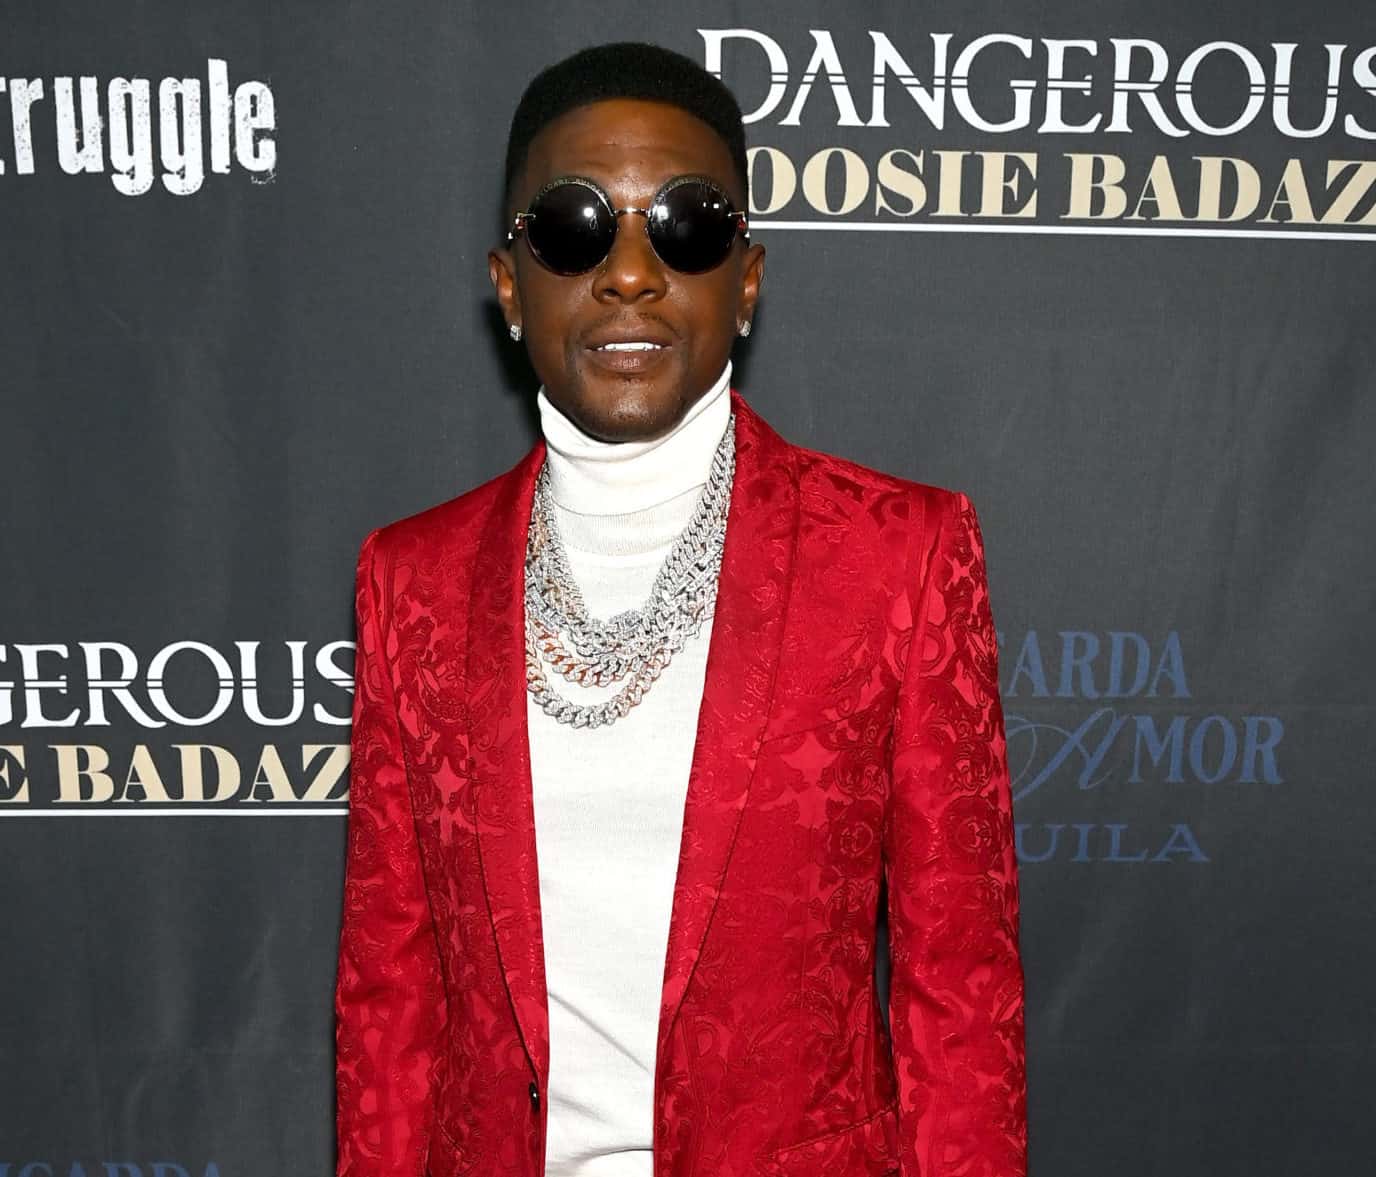 Boosie's time on stage was cut short after an altercation broke out during his performance in Atlanta at the State Farm Arena.